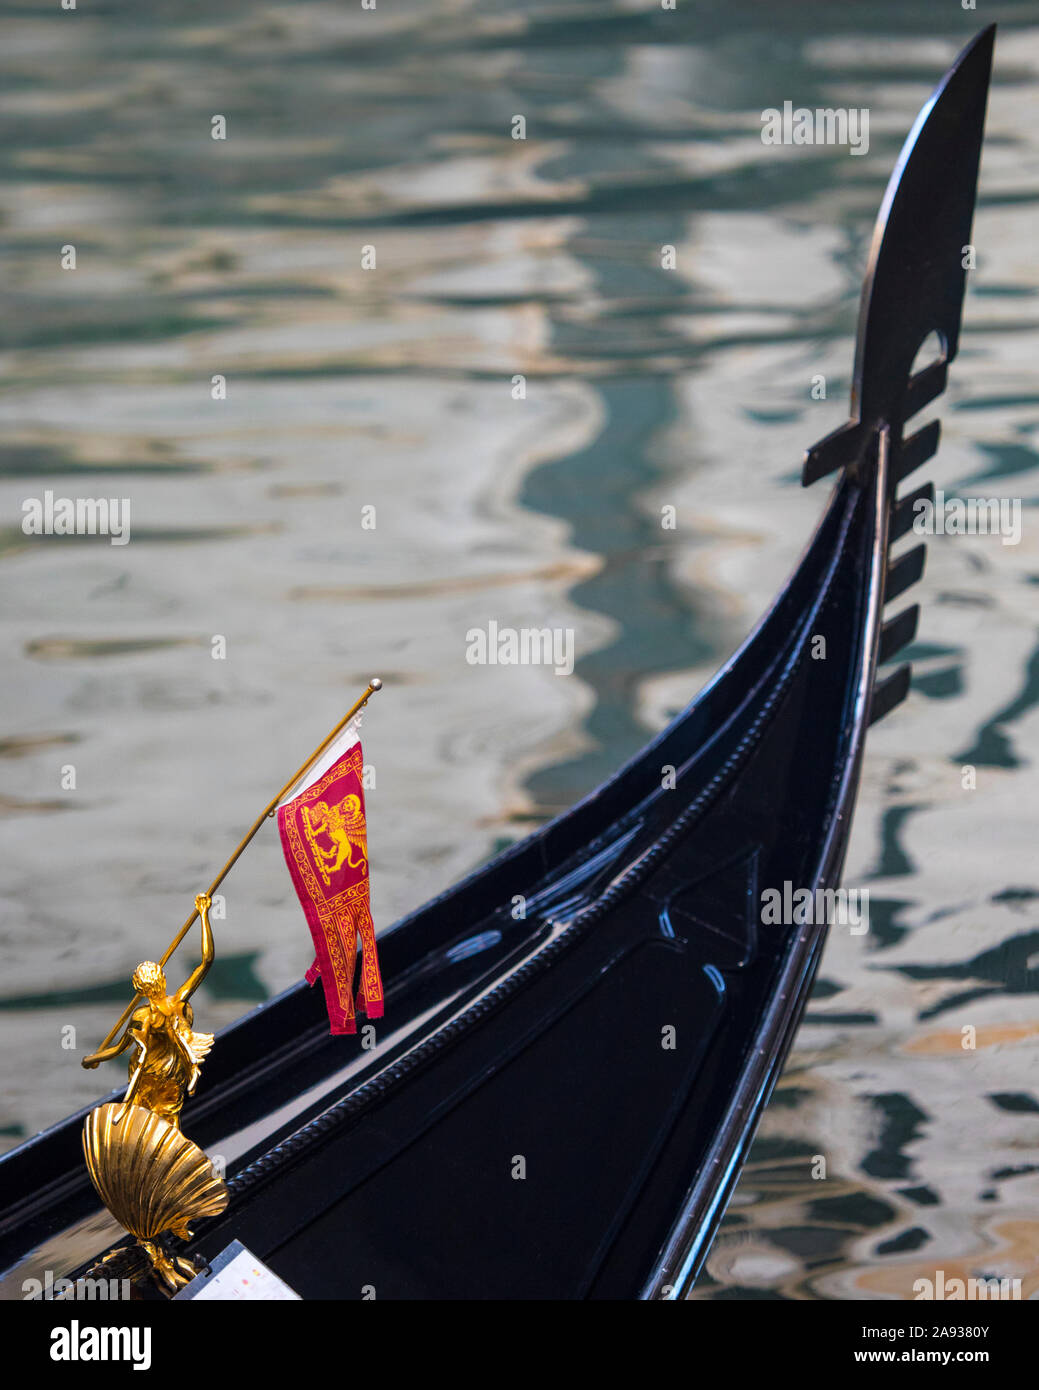 Close-up detail of a golden sculpture decoration holding the Venetian flag on a Gondola in Venice, Italy. Stock Photo